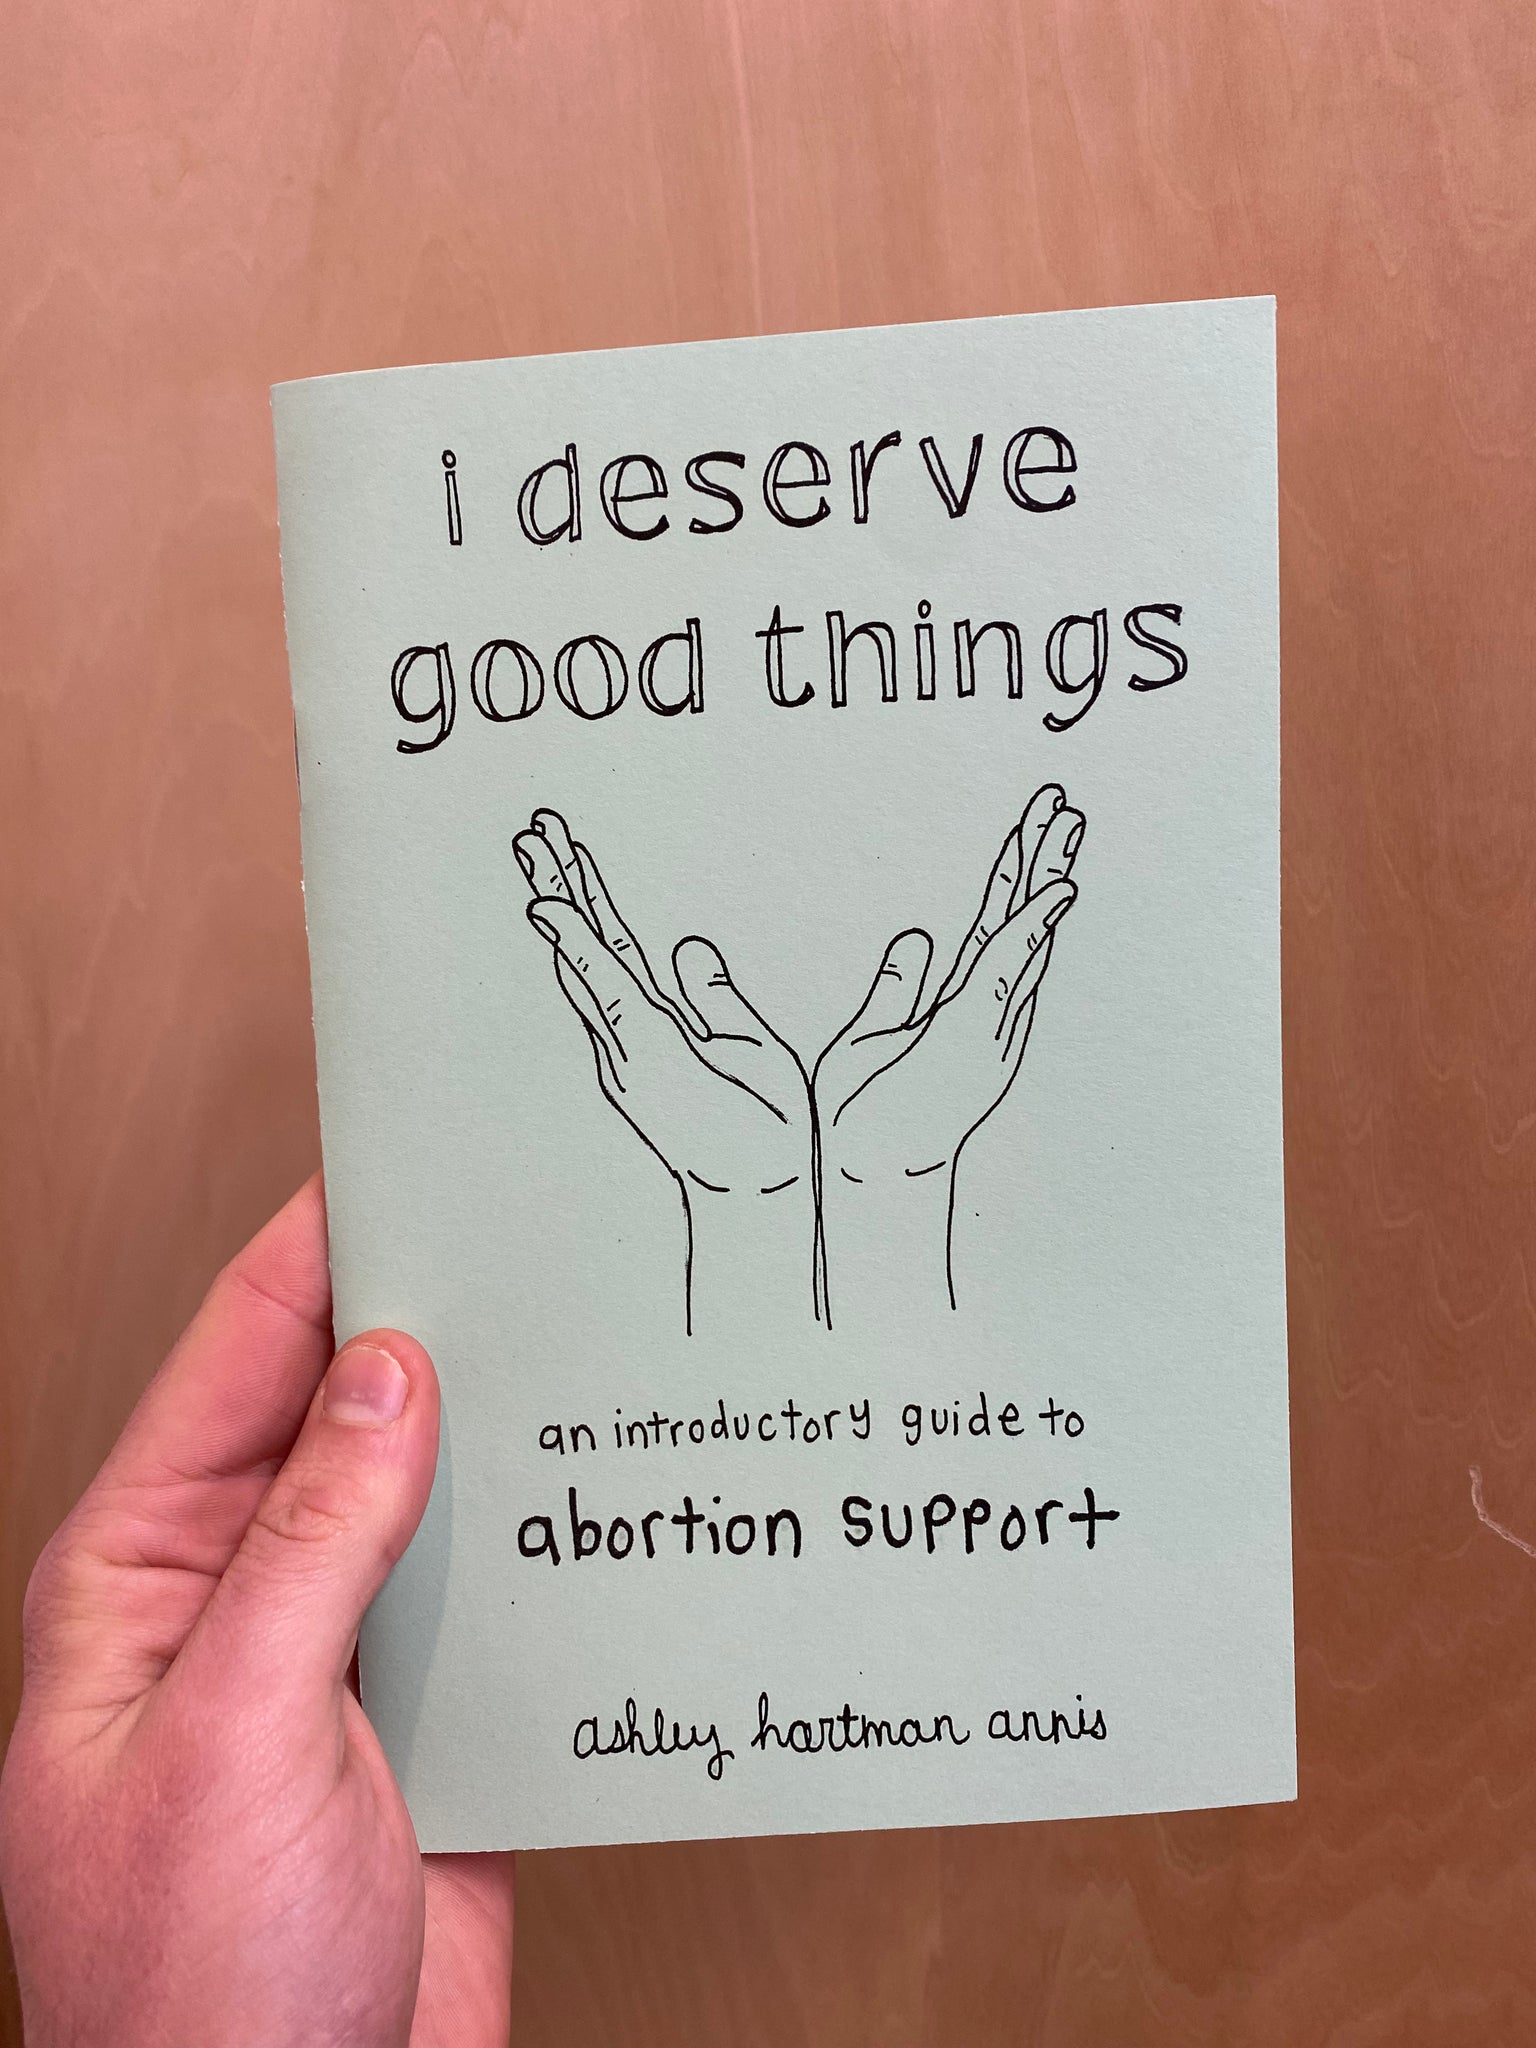 I Deserve Good Things: An Introductory Guide to Abortion Care